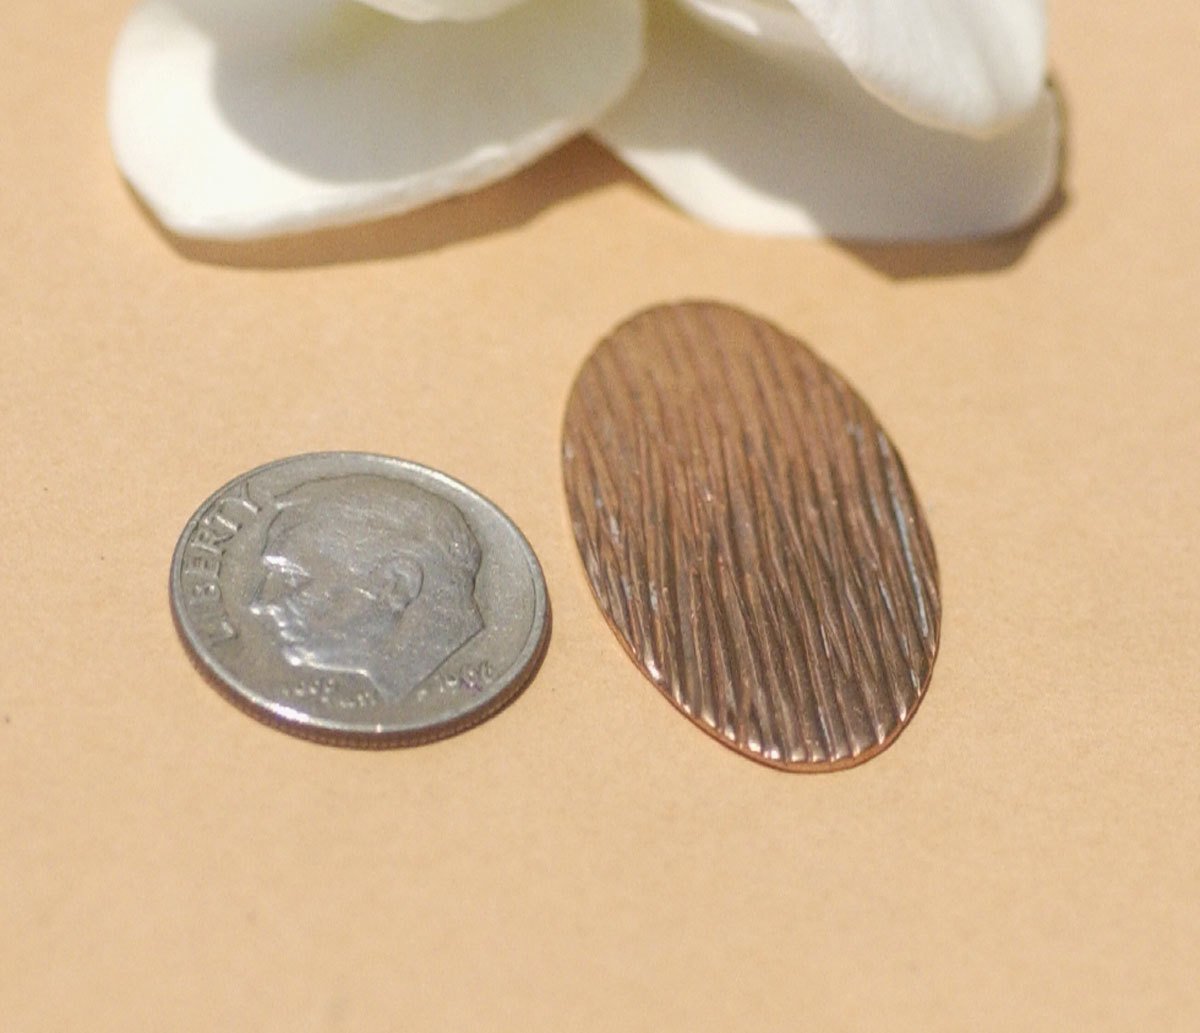 Woodgrain Pattern Oval 30mm x 17mm 24g Blanks Shape for Enameling Stamping Texturing Variety of Metals